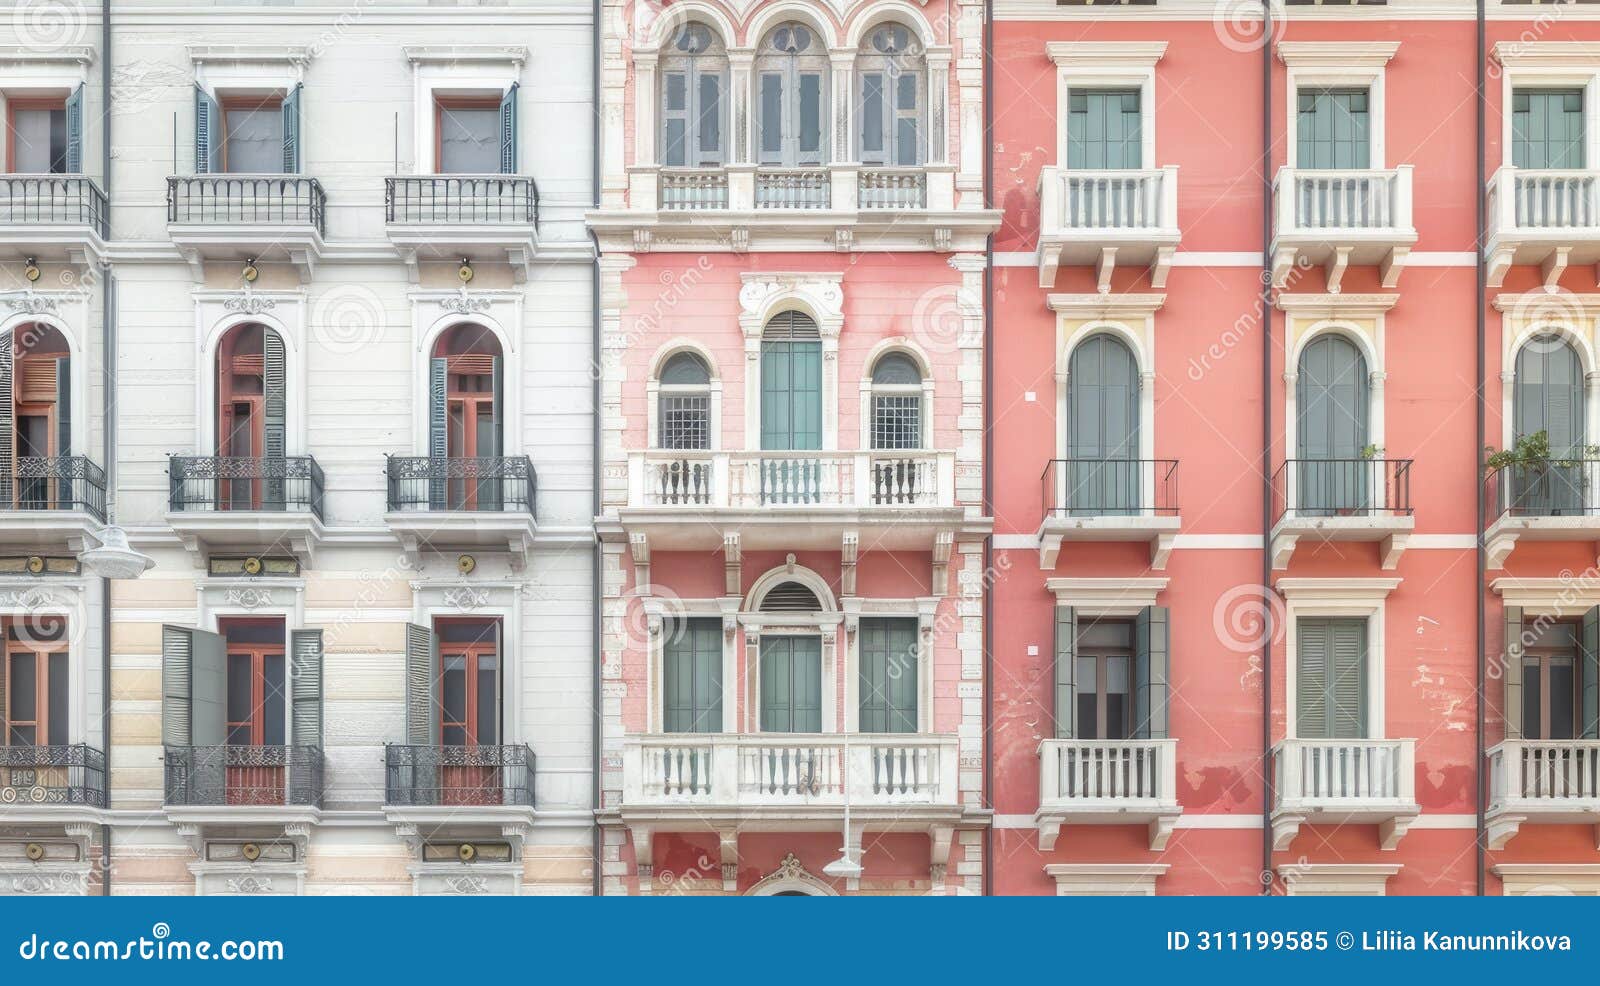 a beautiful building harmoniously blending italian, spanish, and british styles for the facade, seamlessly integrating